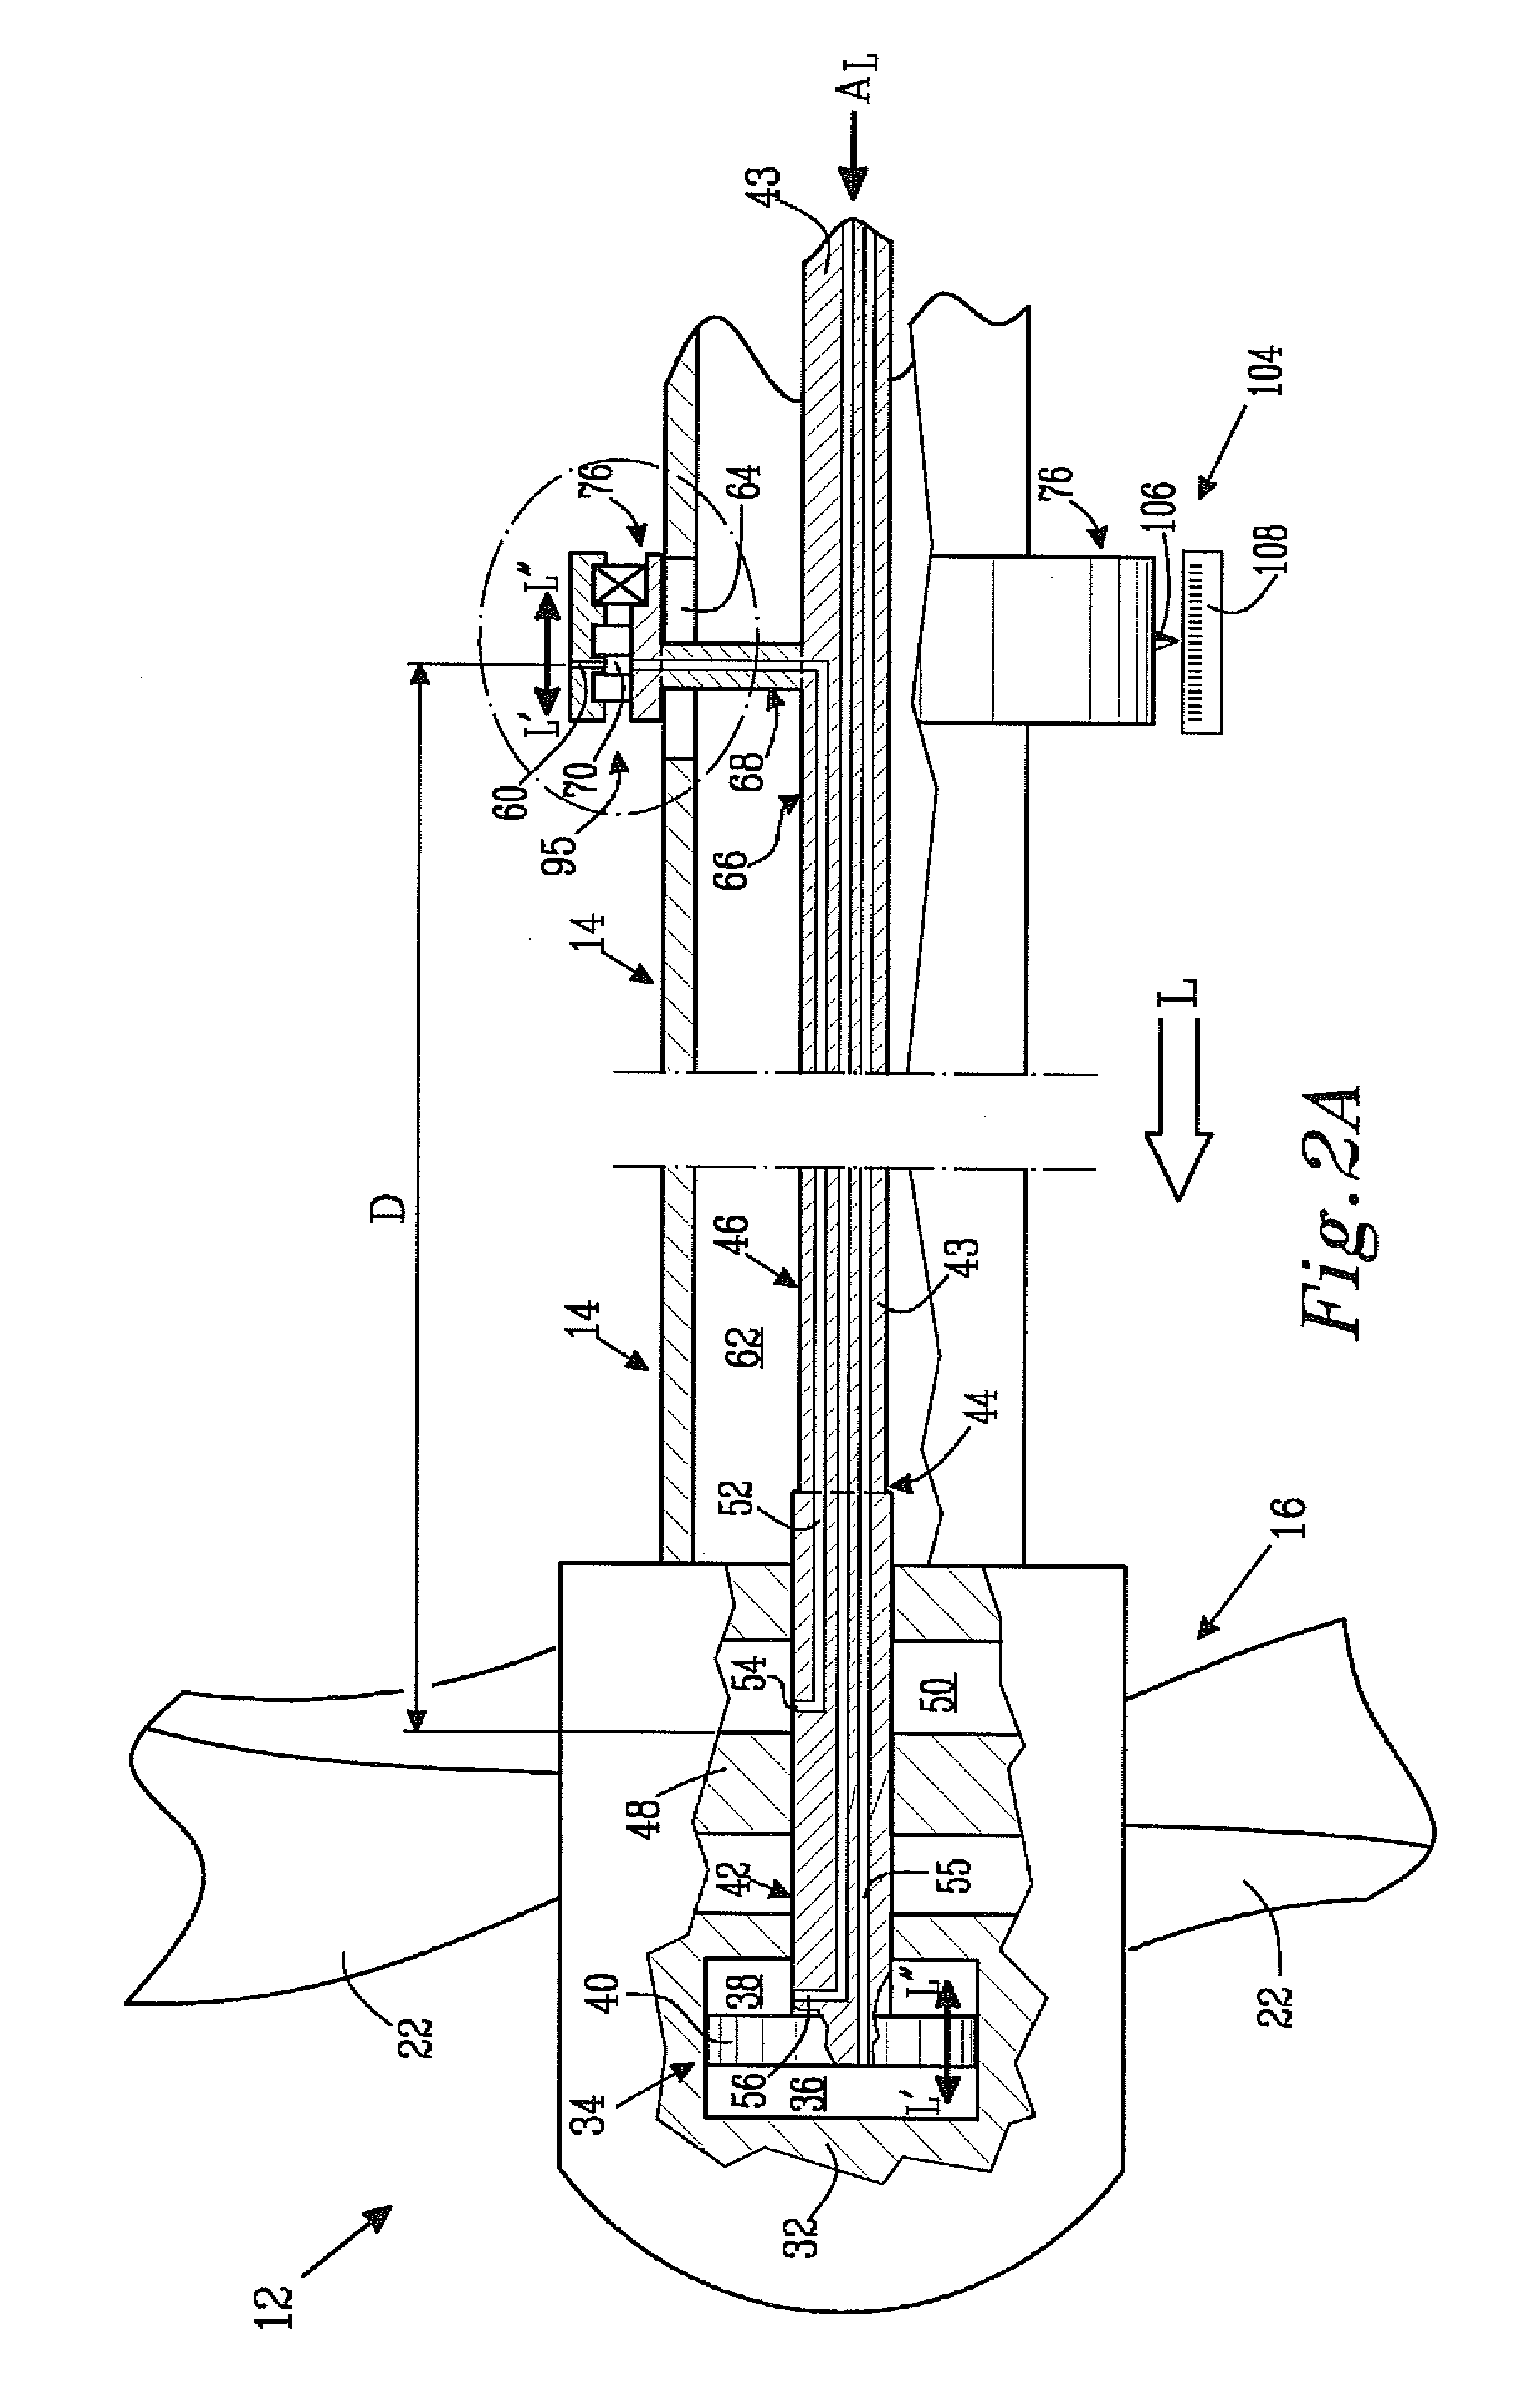 Adjustable propeller arrangement and a method of distributing fluid to and/or from such an adjustable propeller arrangement